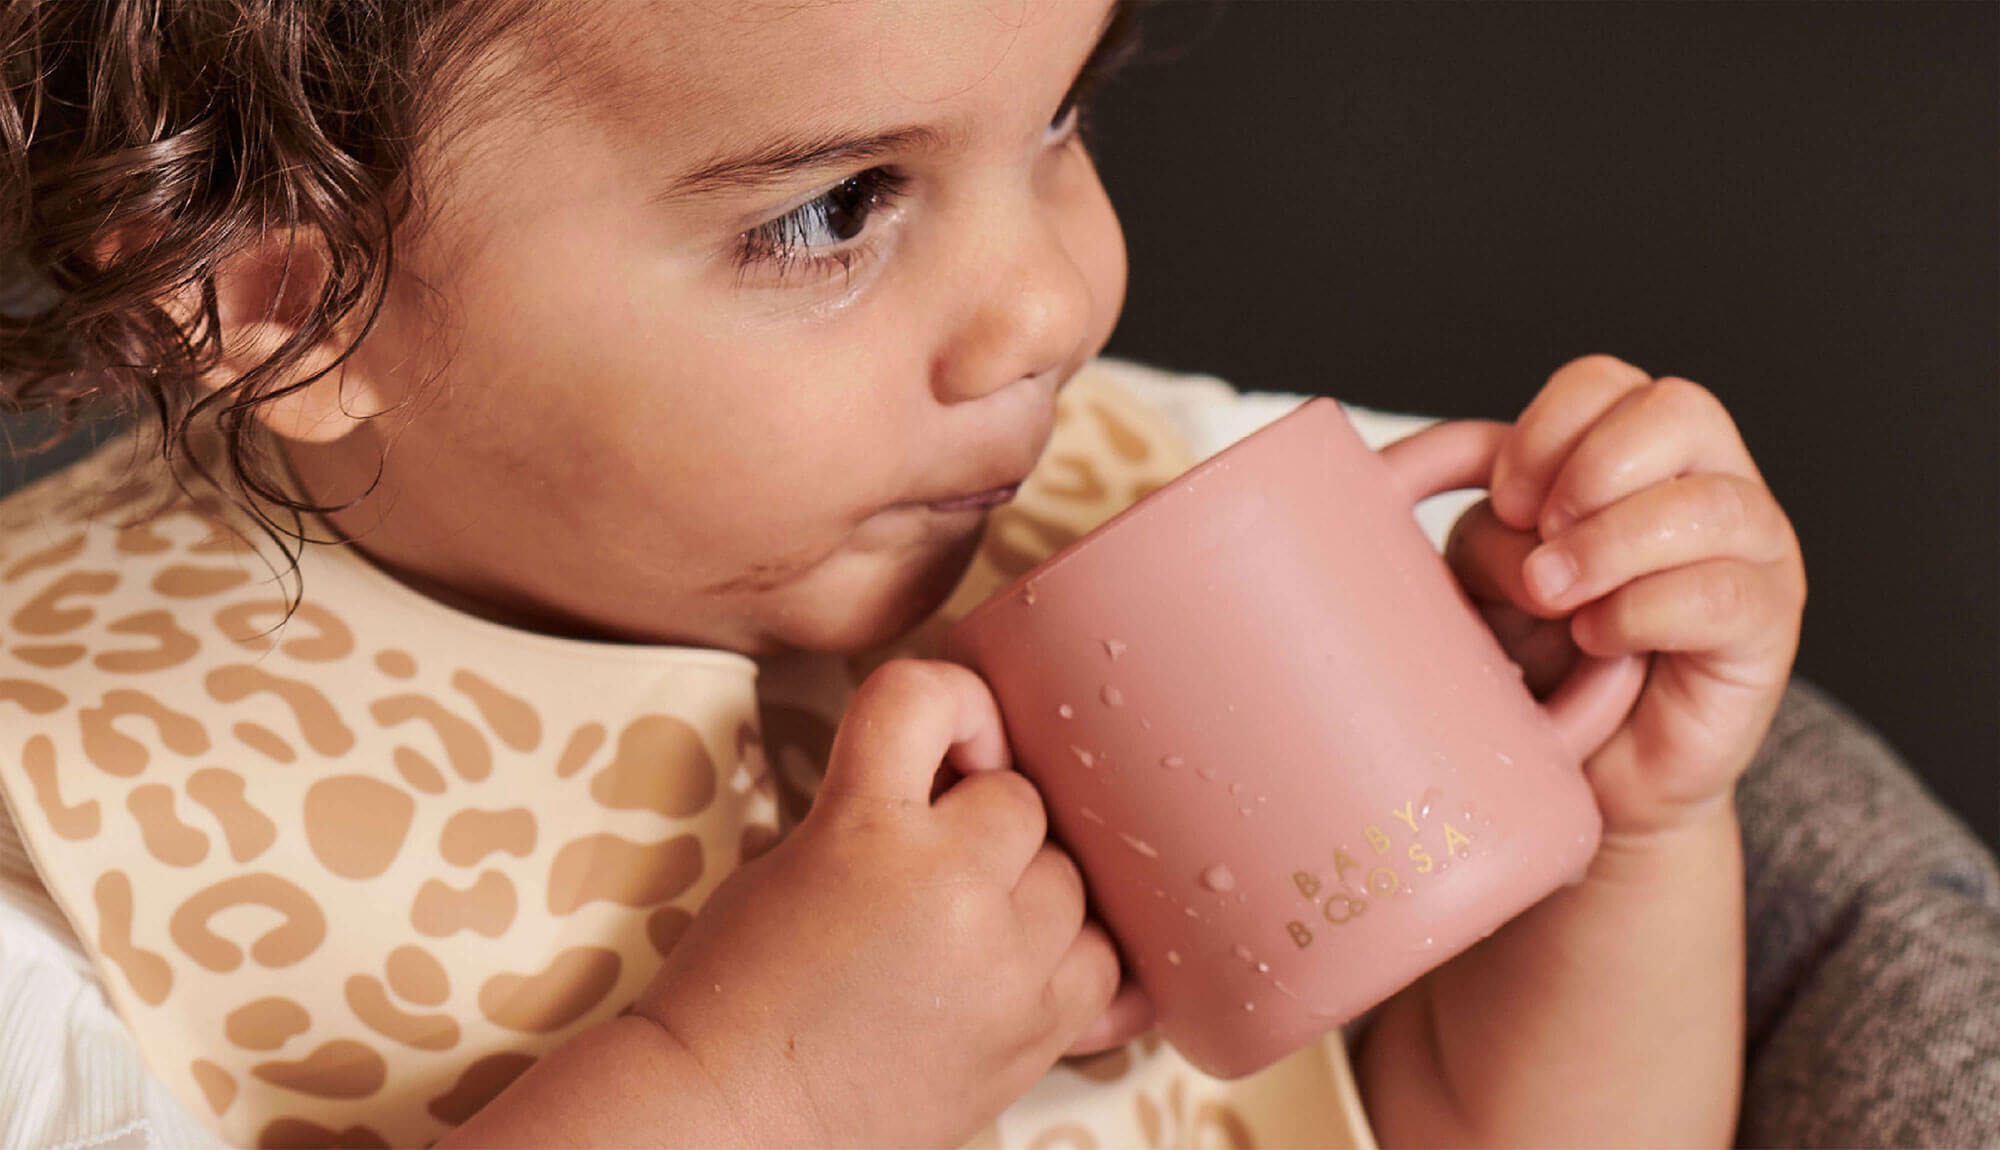 Toddler holding a pink open cup by two side handles